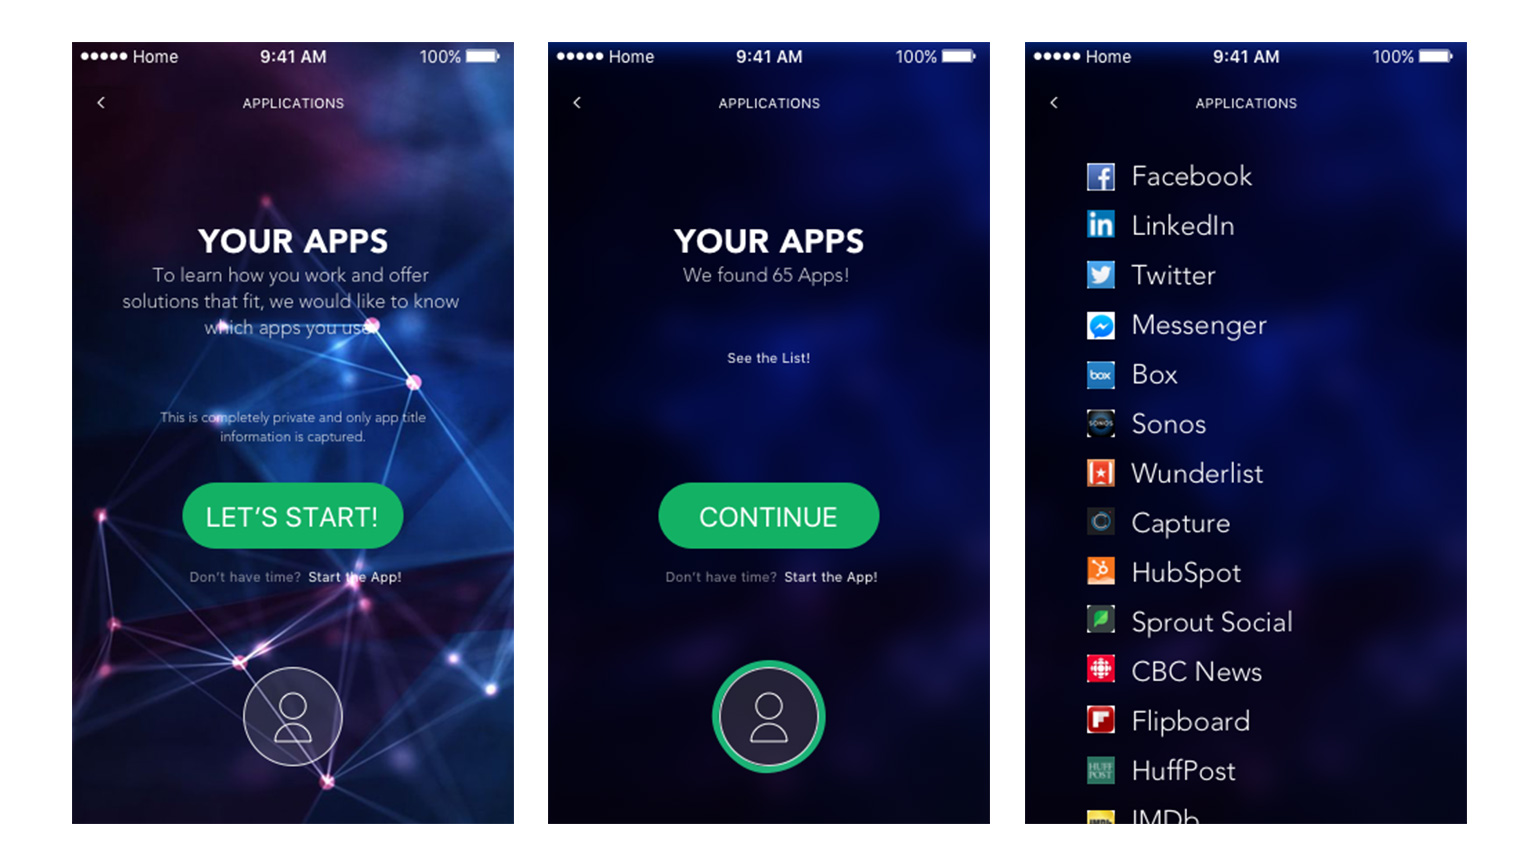 Sidekick identifies apps that users have on their phone and prompts them to leave a review.